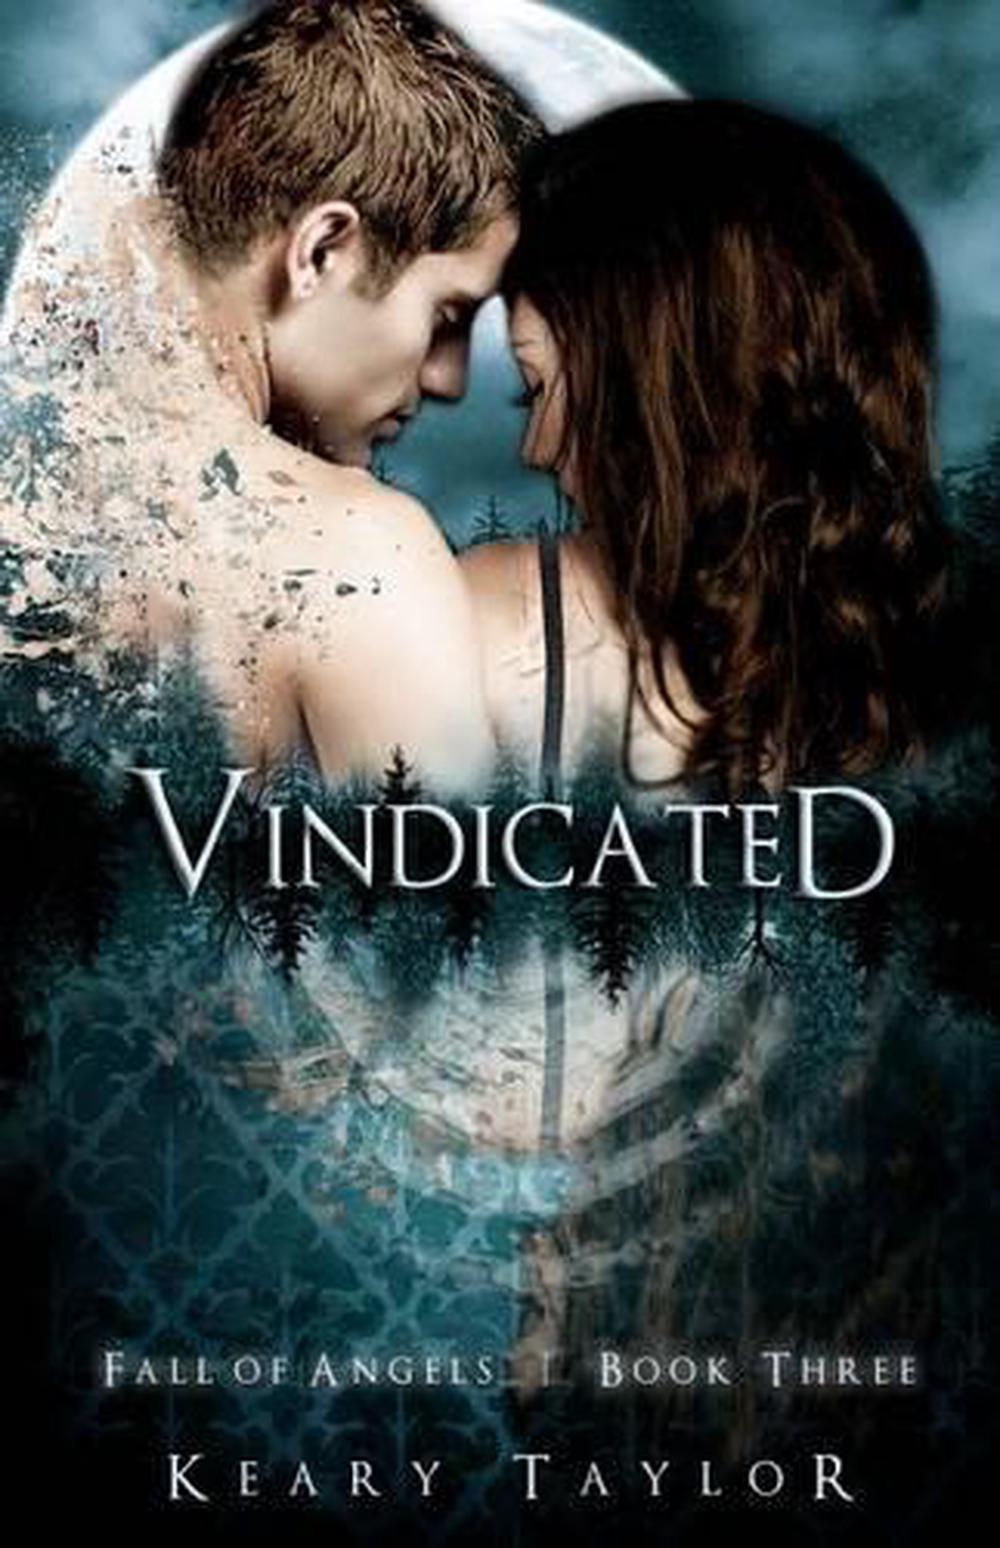 Vindicated by Keary Taylor